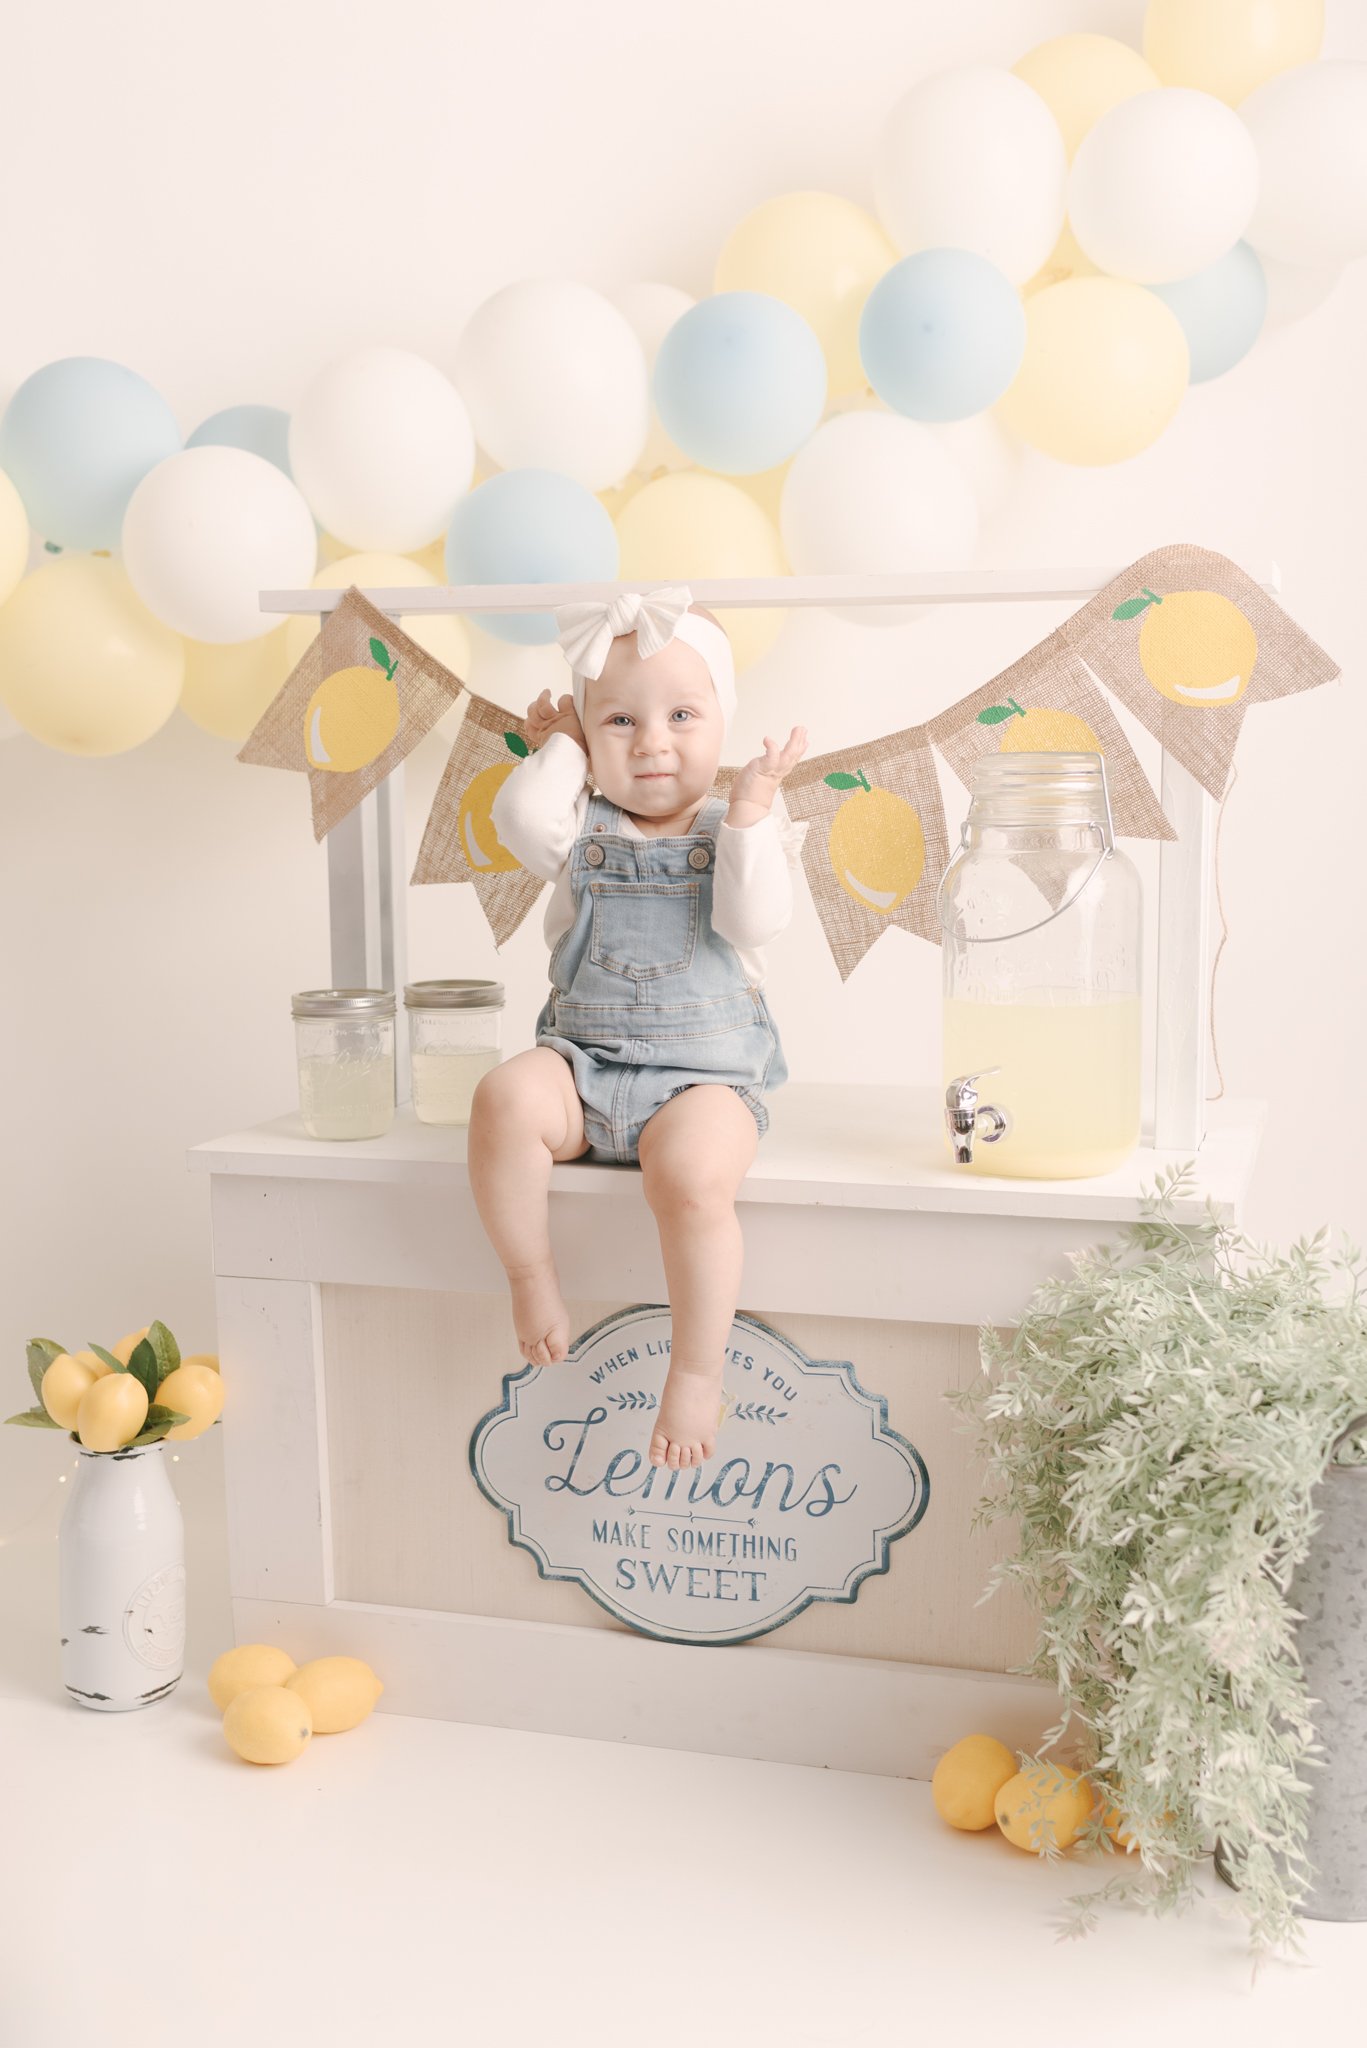 Lemonade_Stand_Frist_Birthday_Girl_Smash_and_Splash_Session_Cake_Studio_by_Erika_Child_and_Family_Photographer_for_Christie_Leigh_Photo_in_Warren_OH_Ohio_Trumbull_County_002.jpg